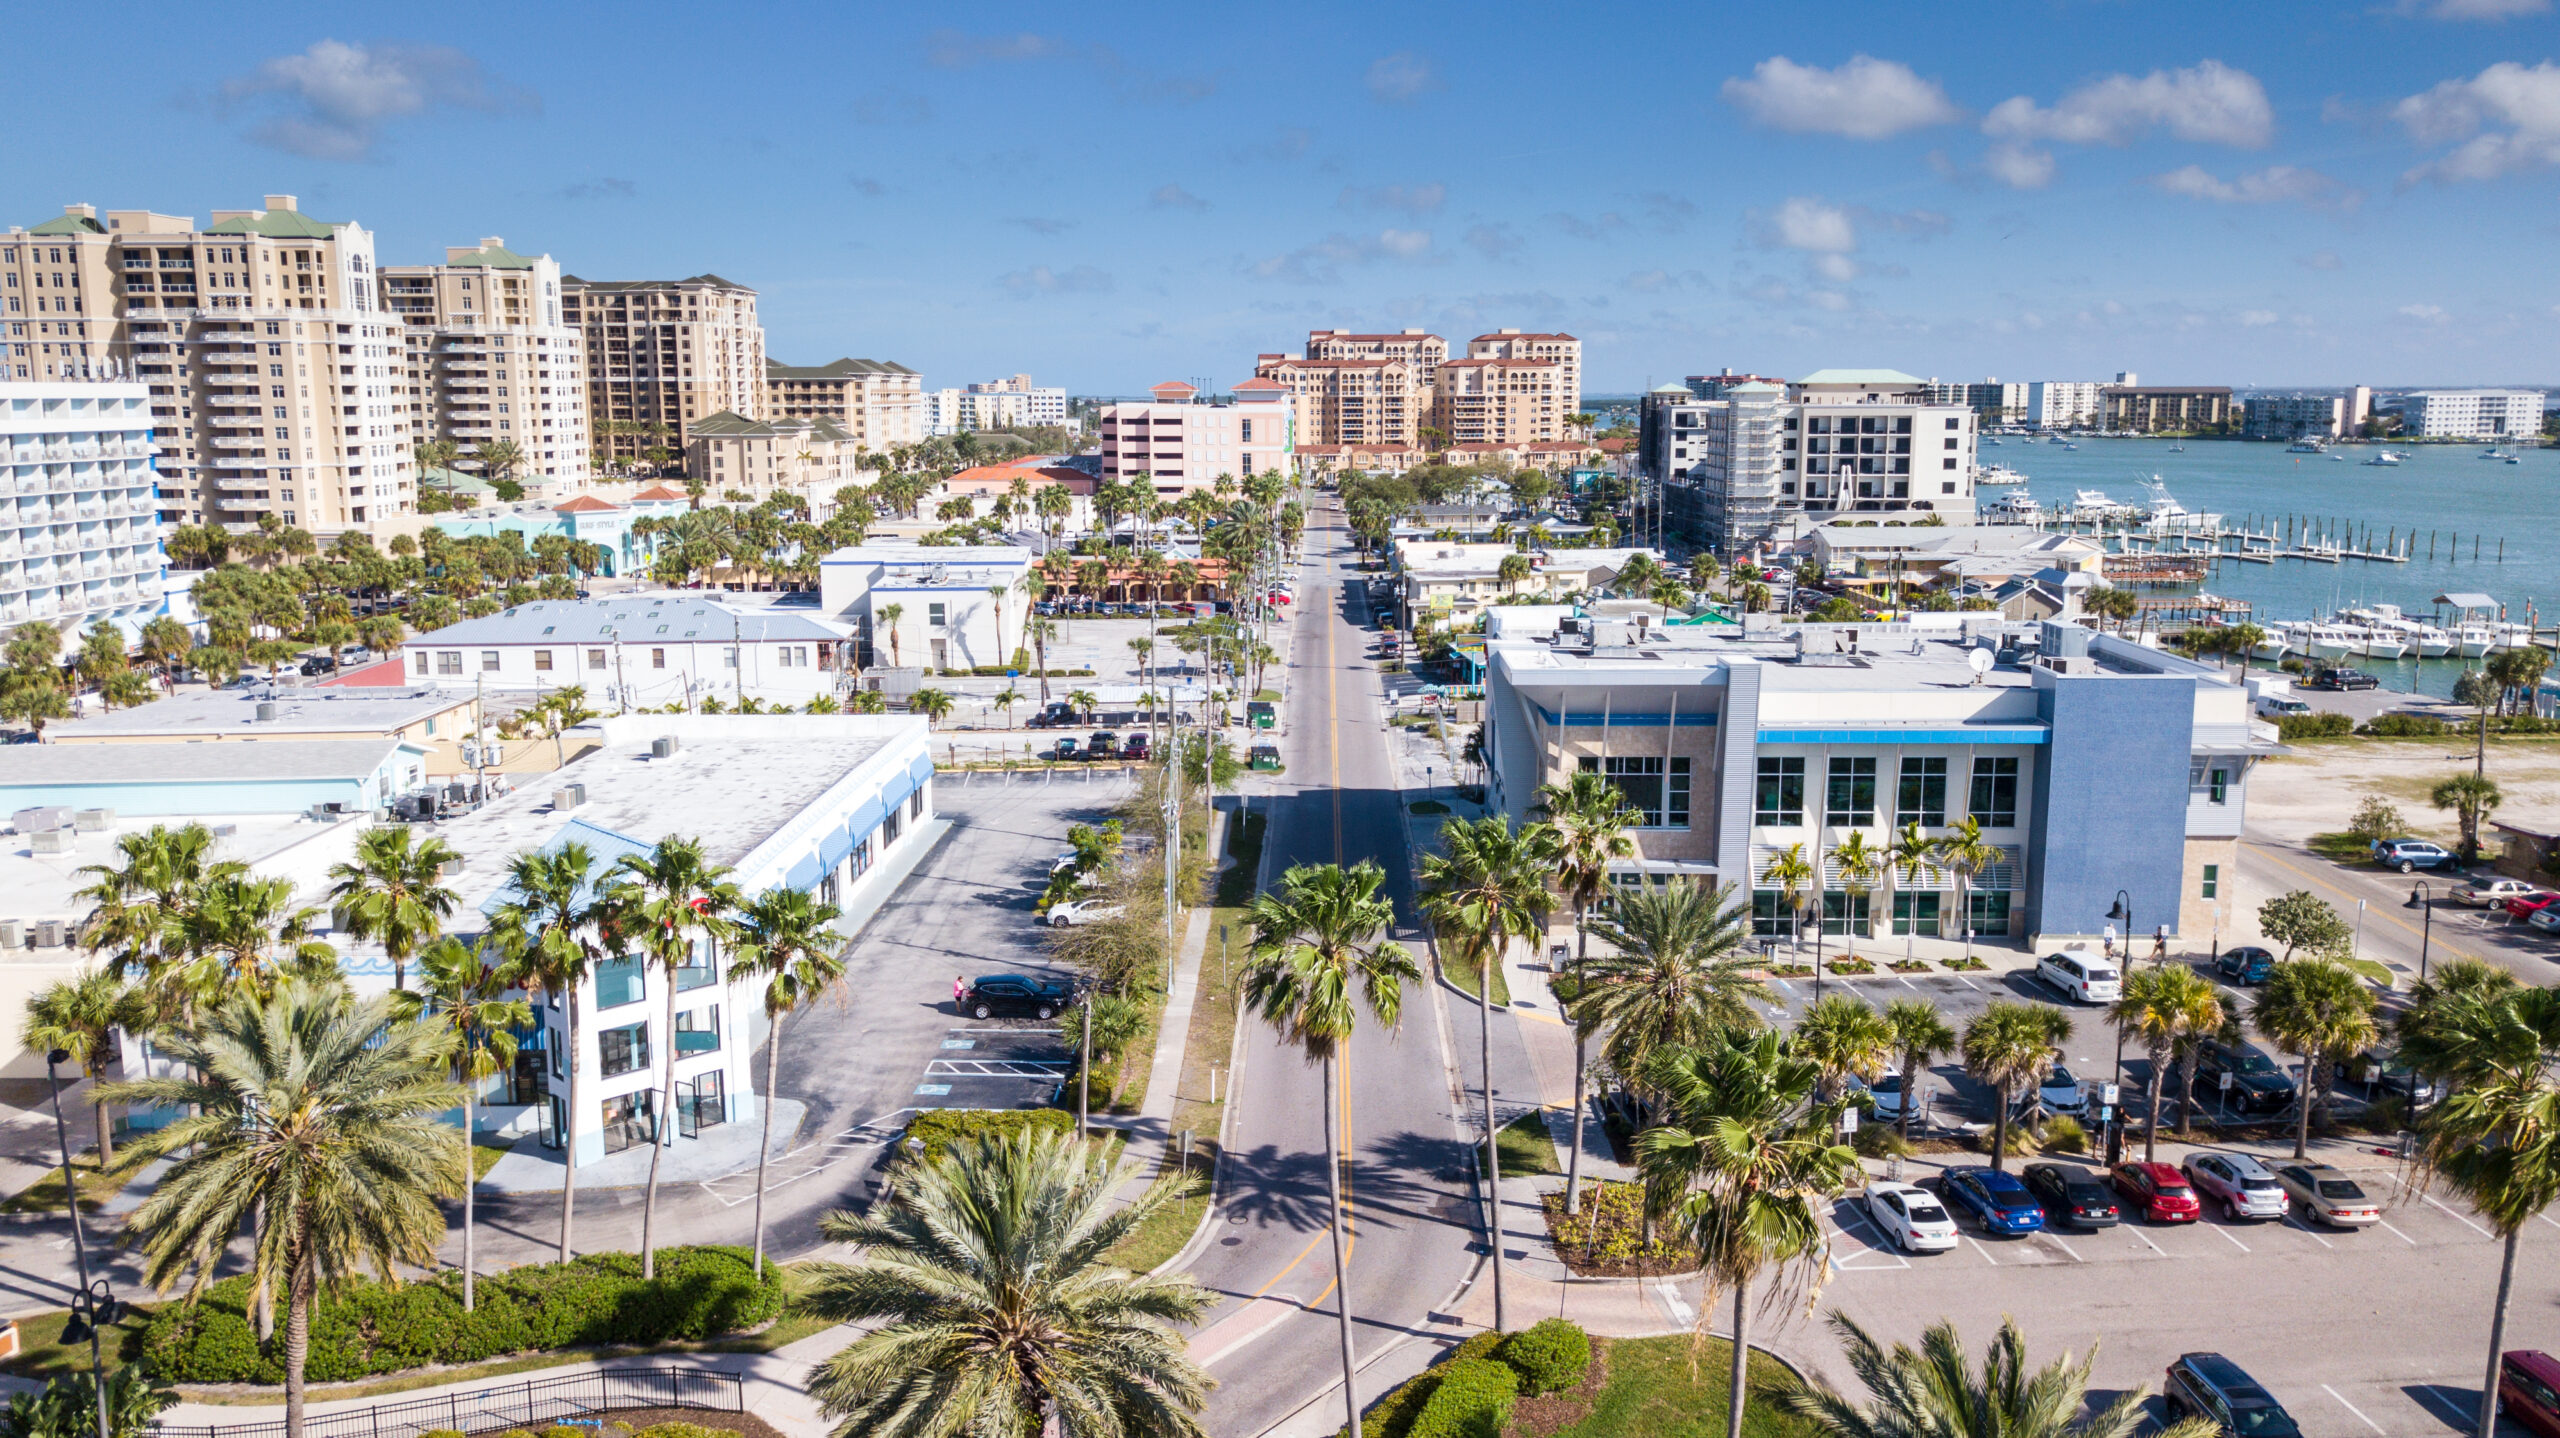 Pros and Cons of Living in Clearwater, FL